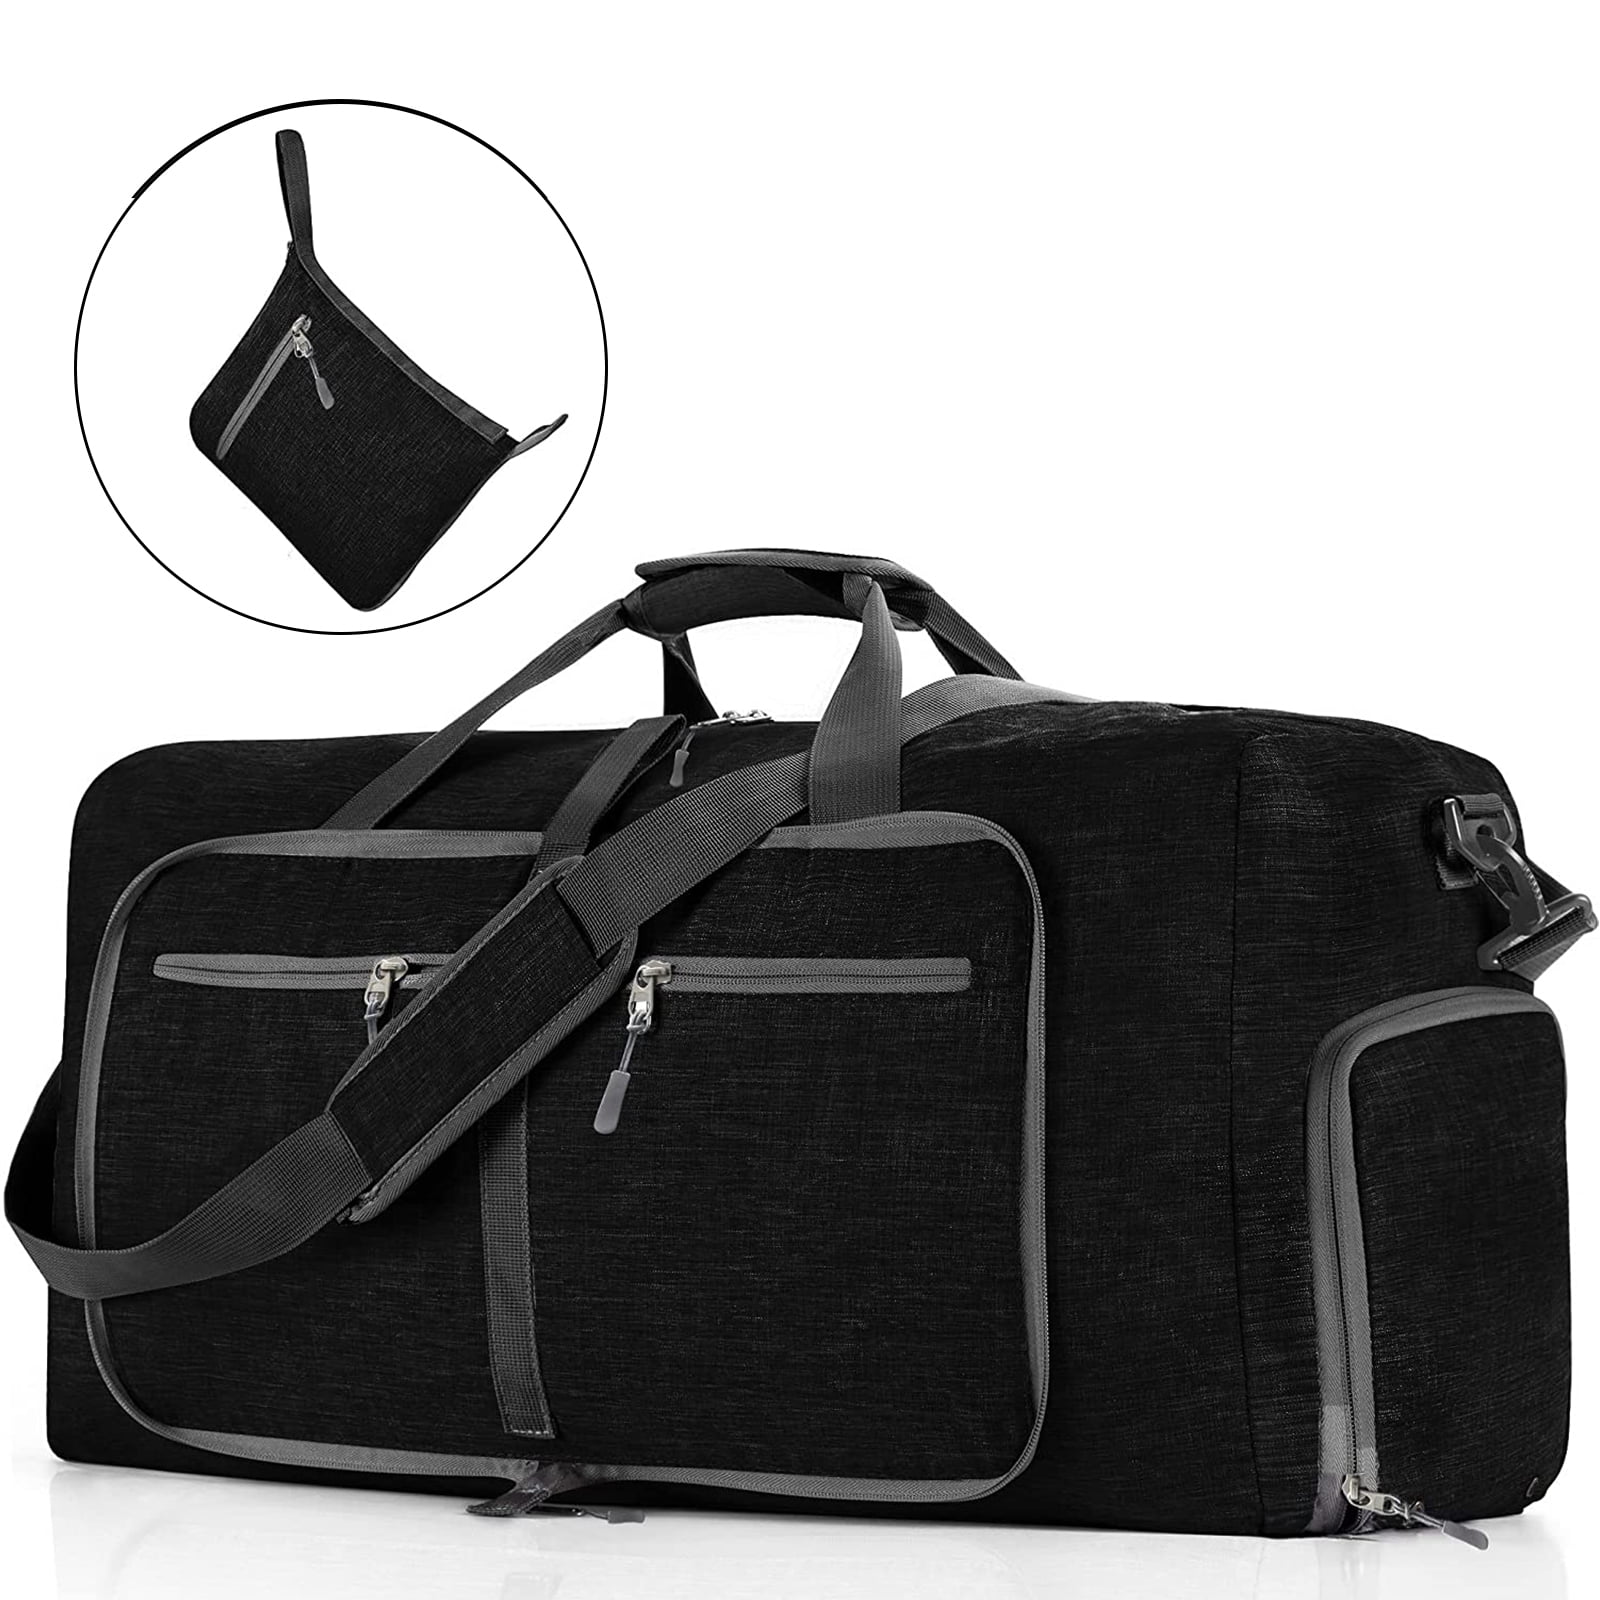 65L Travel Duffel Bag, 24 Extra Large Duffle Bag, Foldable Weekender Bag  with Shoes Compartment, Water-proof & Tear Resistant Overnight Bag for Men  Women 